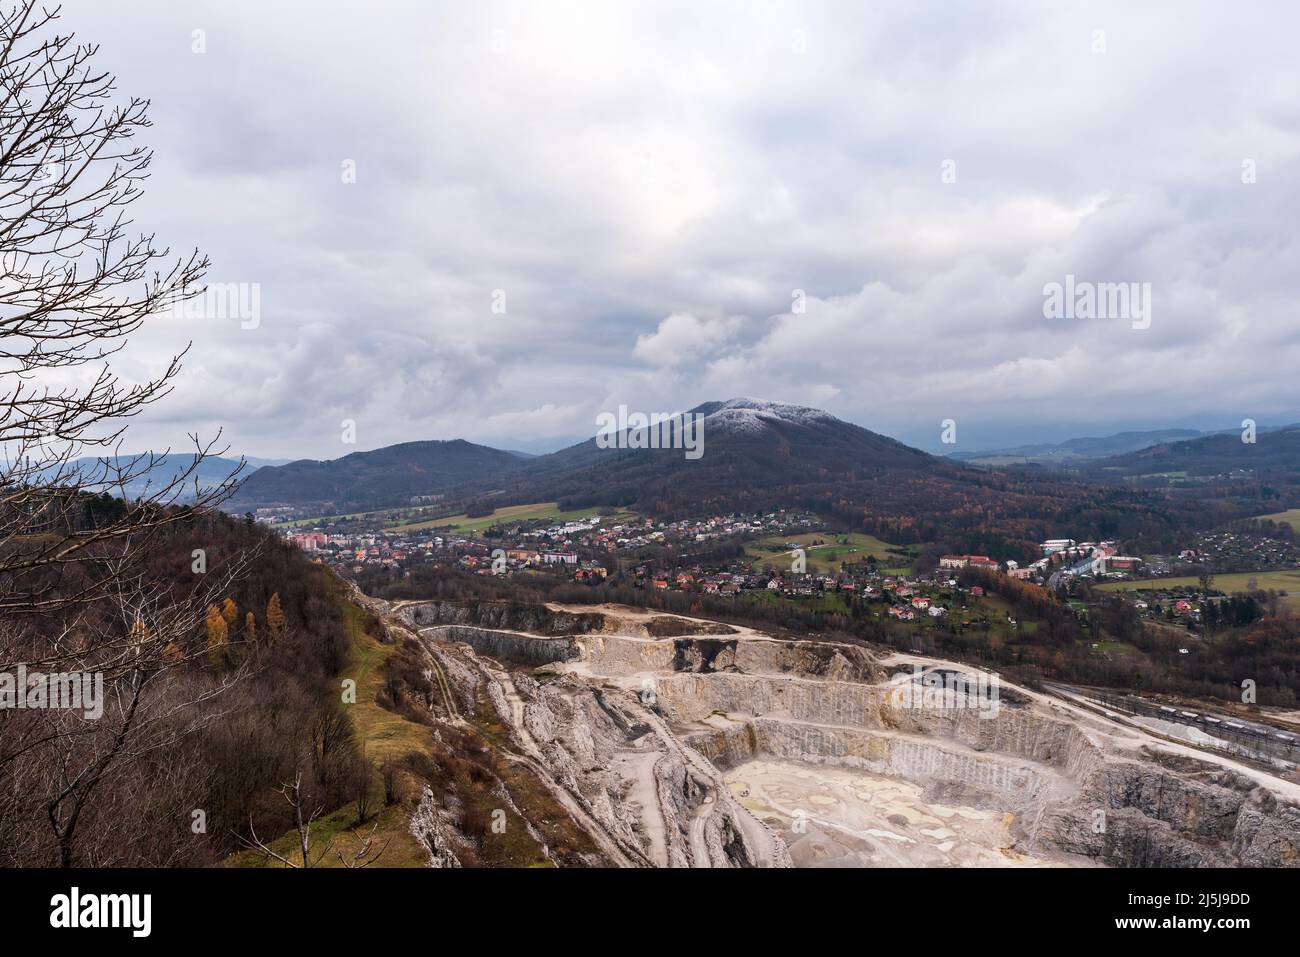 Limostone quarry on Kotouc hill, Koprivnice town and Cerveny kamena hill on the background in Czech republic during late autumn cloudy day Stock Photo